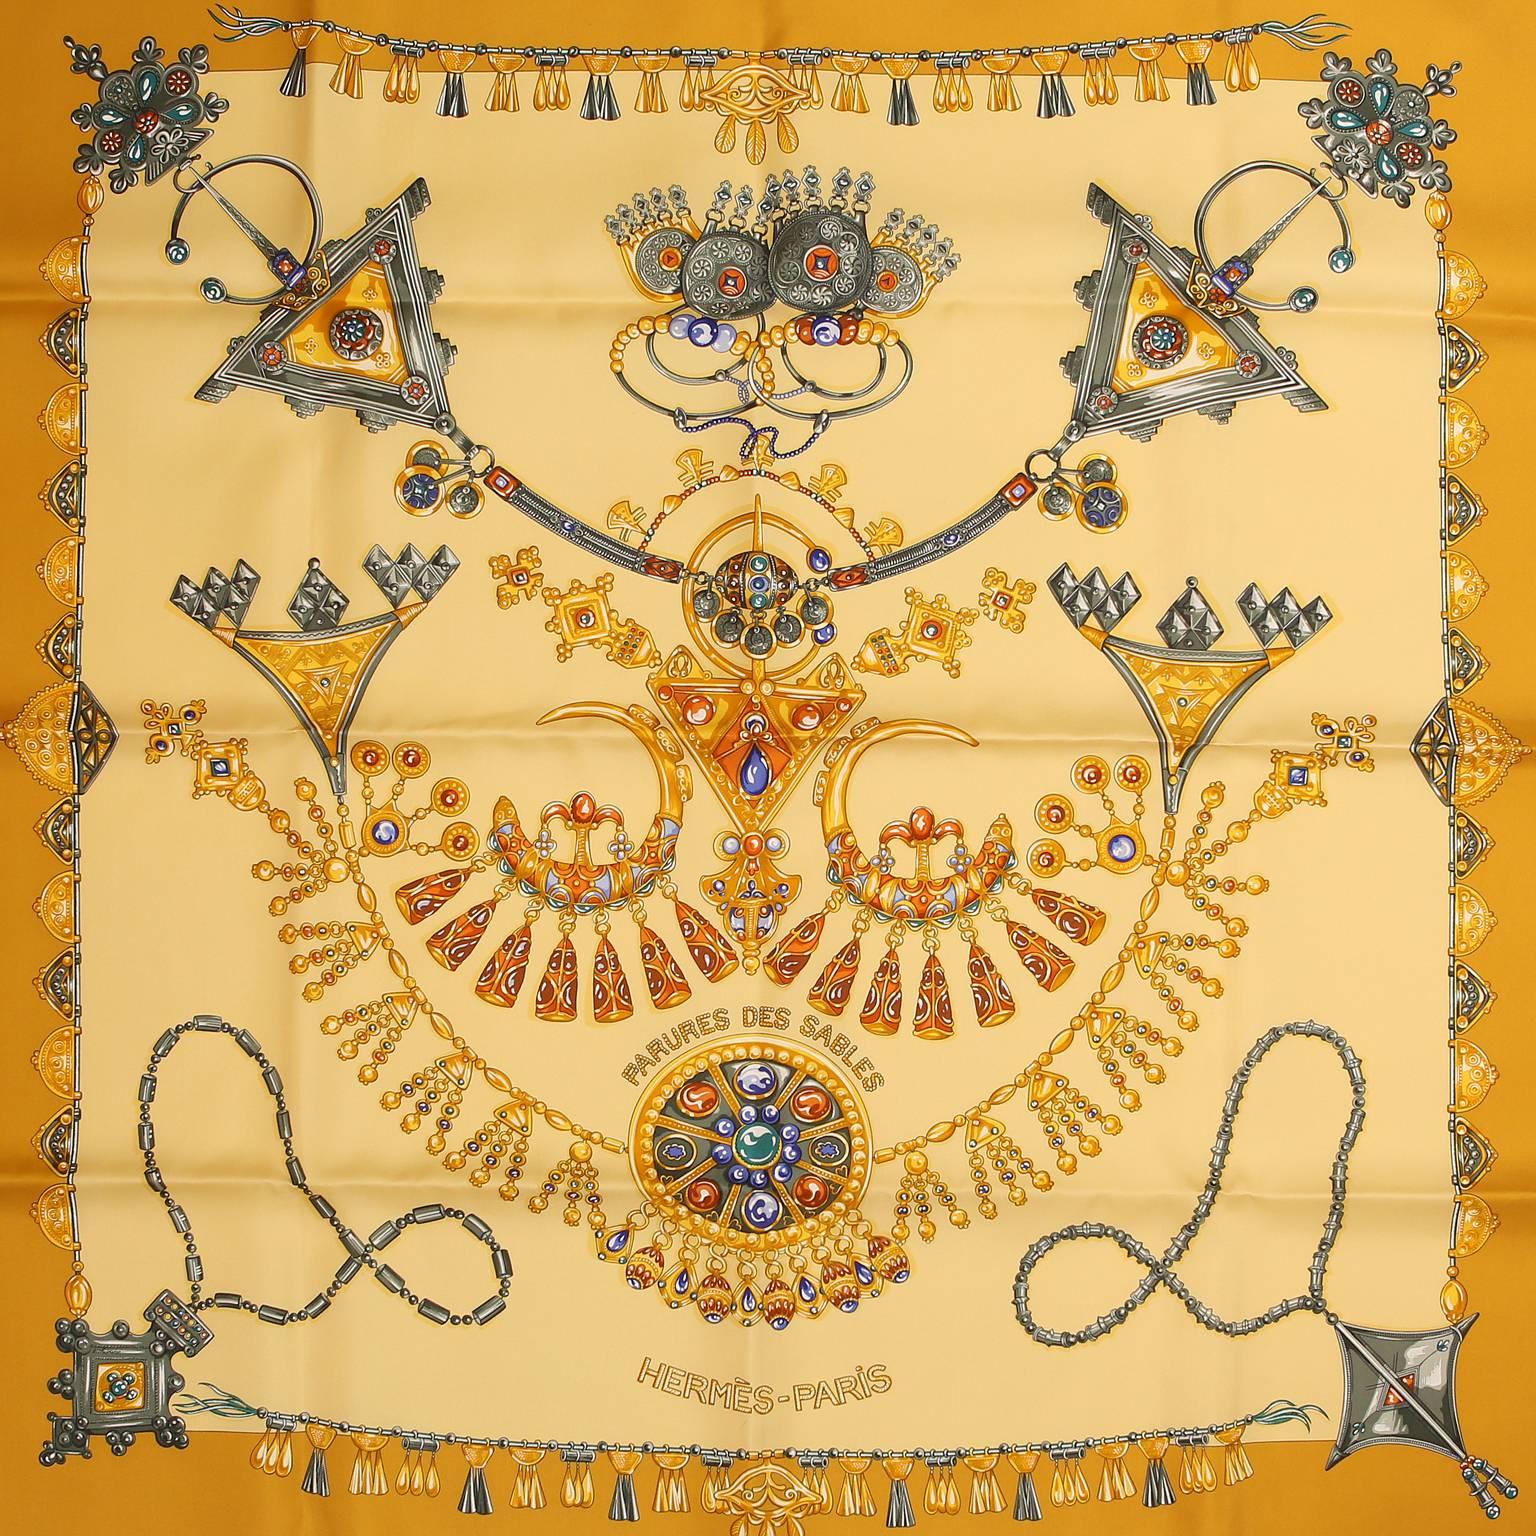 Hermès Parures des Sables 90 cm Silk Scarf - New in Box
Designed by Laurence Bourthourmieux.  Gold border with a pale yellow background.  Design features Eastern influenced ornaments, jewels and tassels.   Made in France.  100% silk.  35”
A443
